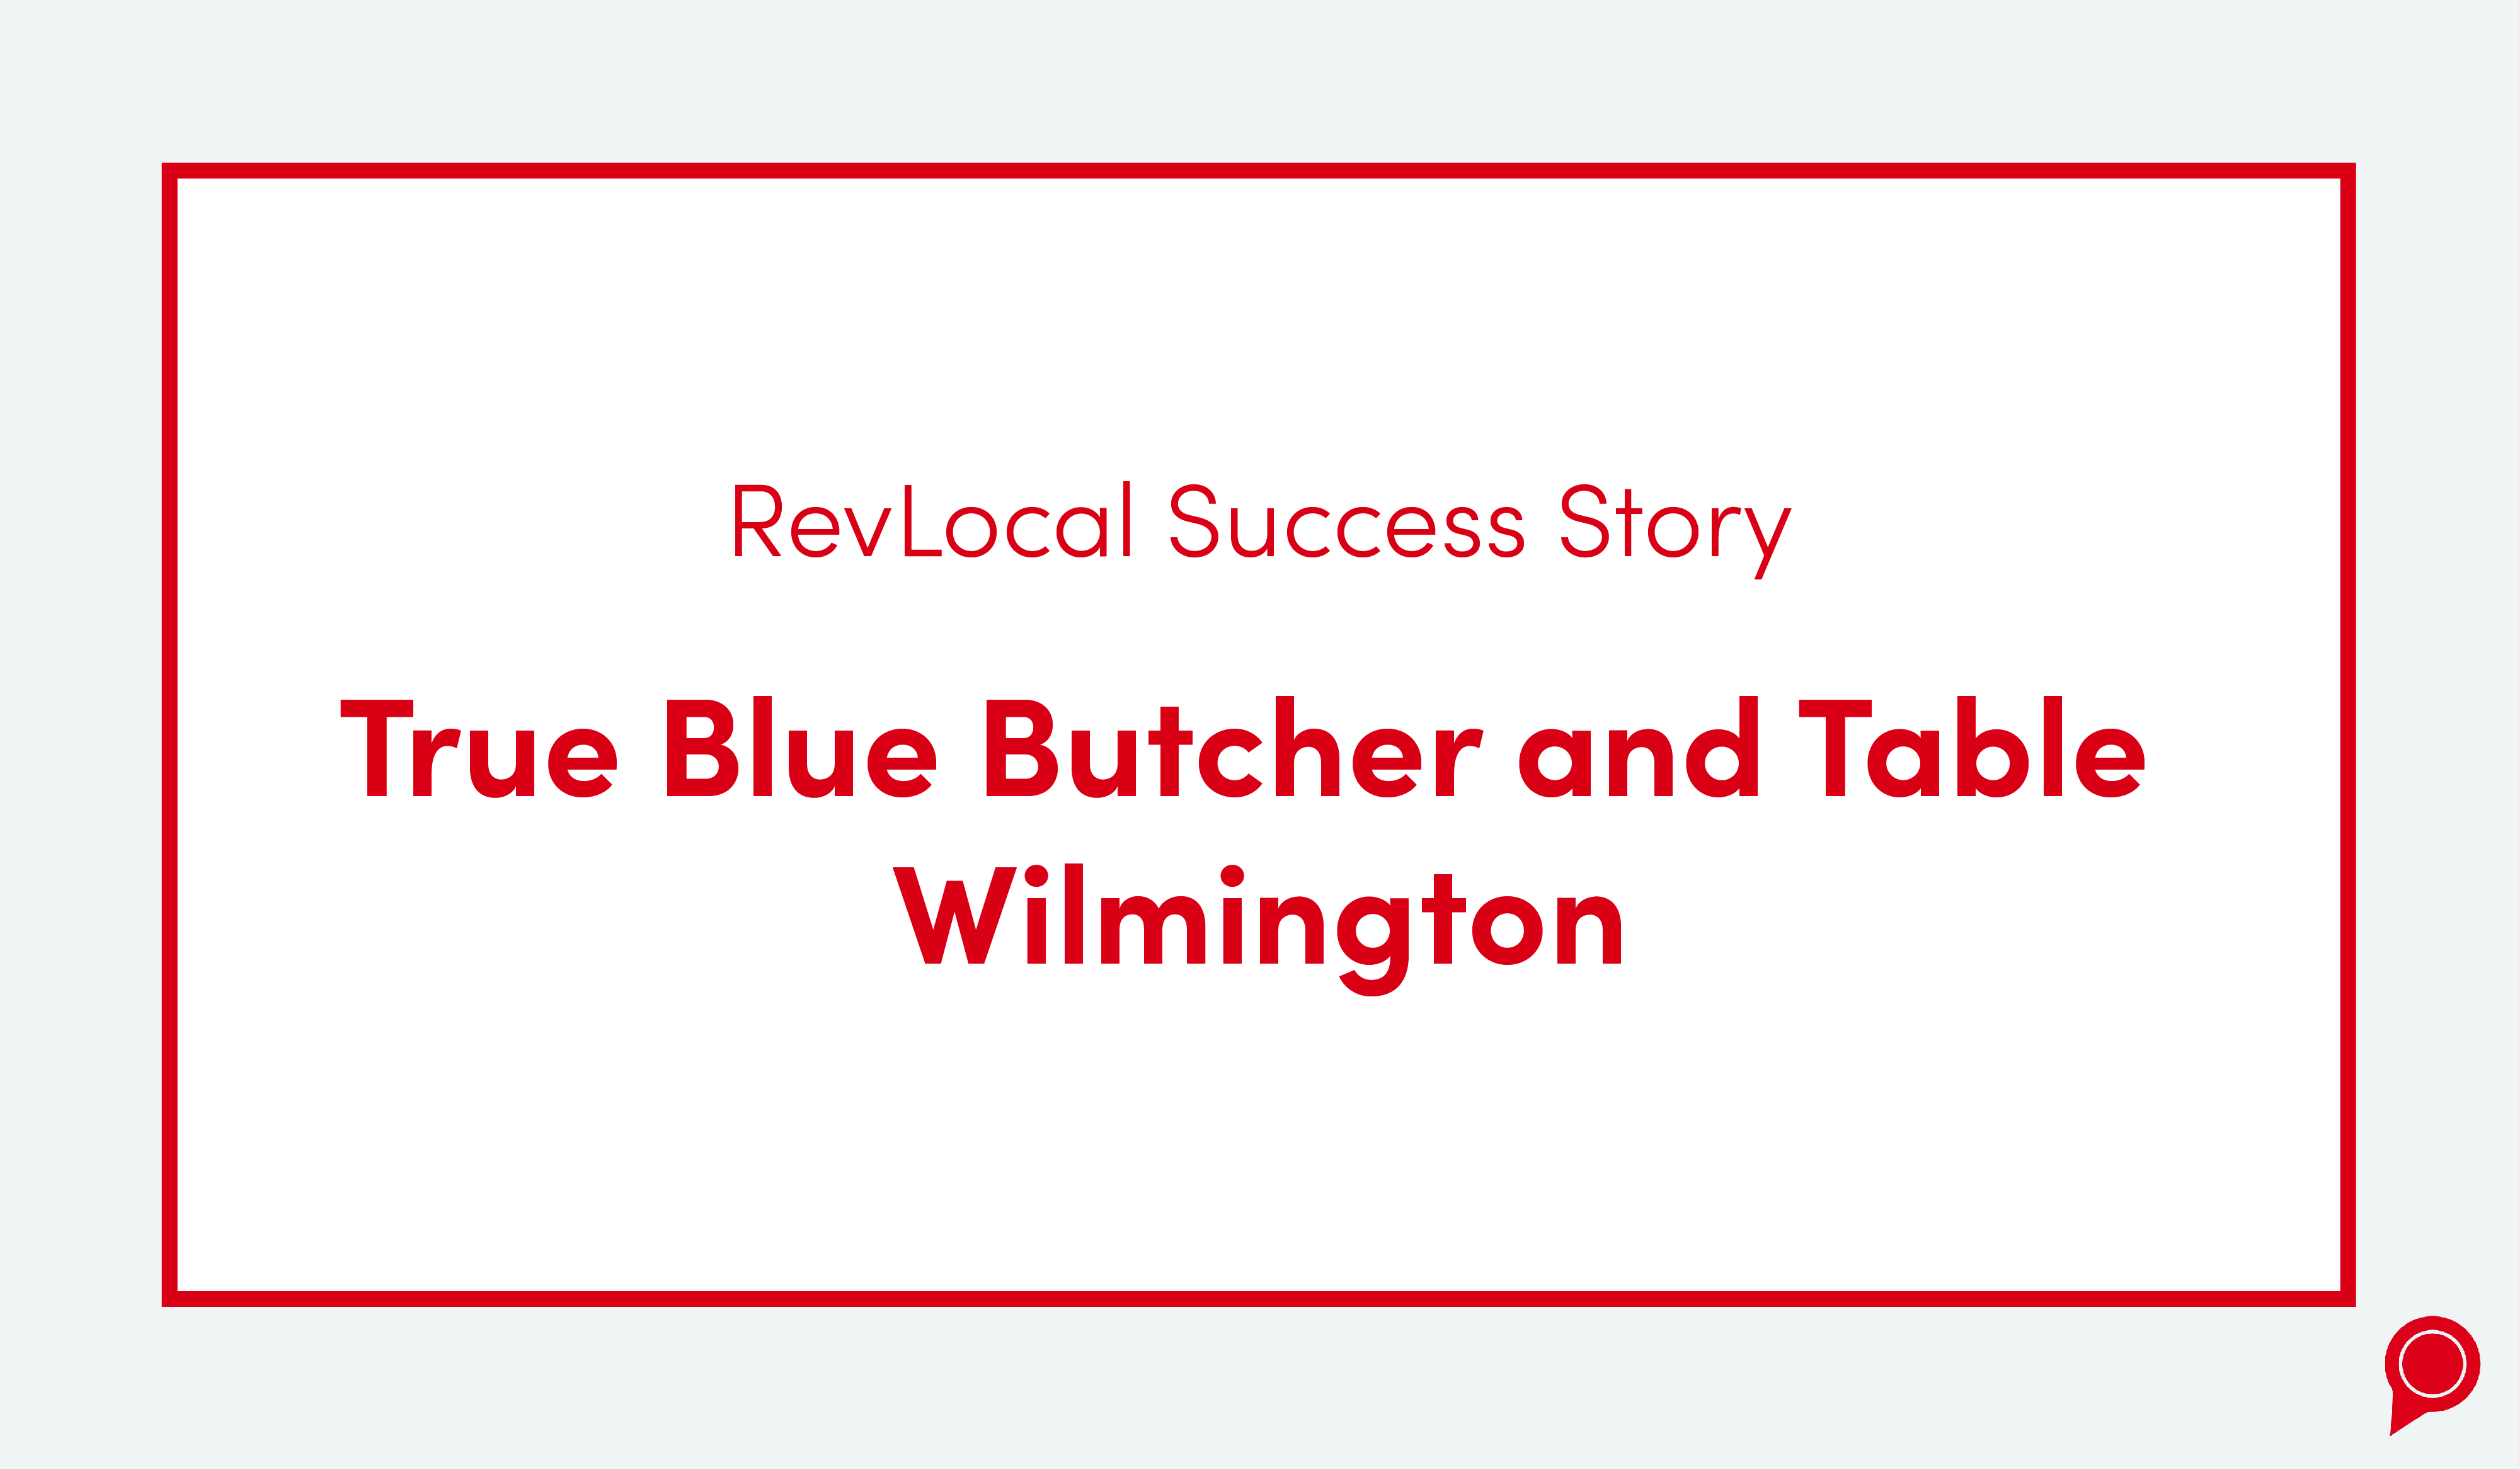 True Blue Butcher and Table Wilmington